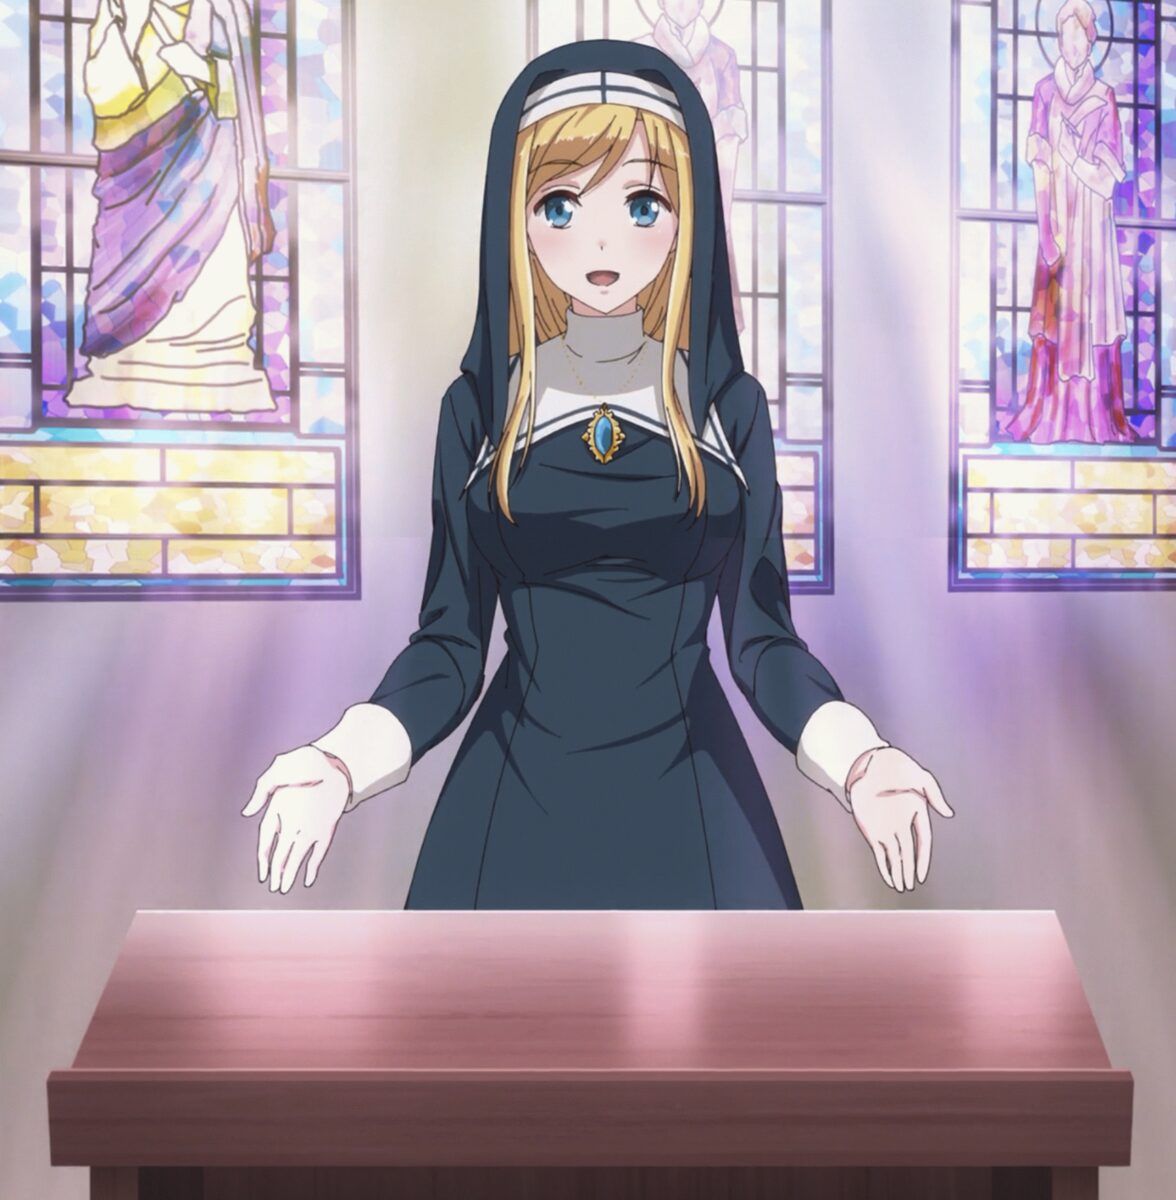 I think there is a religious message in this Anime by LUVUS-7 on DeviantArt